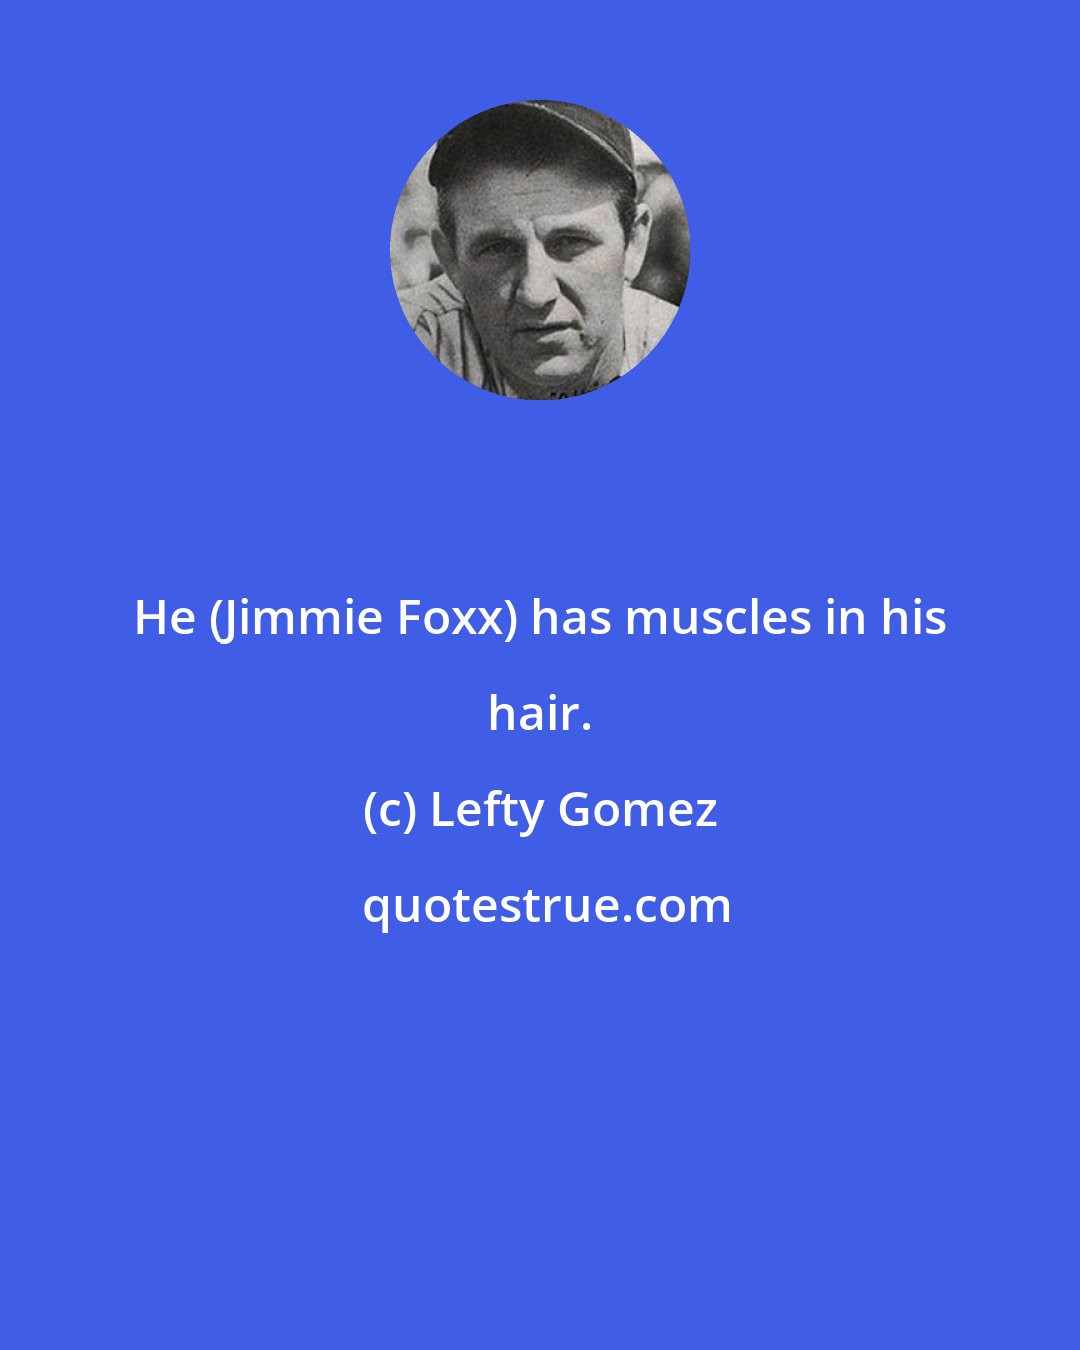 Lefty Gomez: He (Jimmie Foxx) has muscles in his hair.